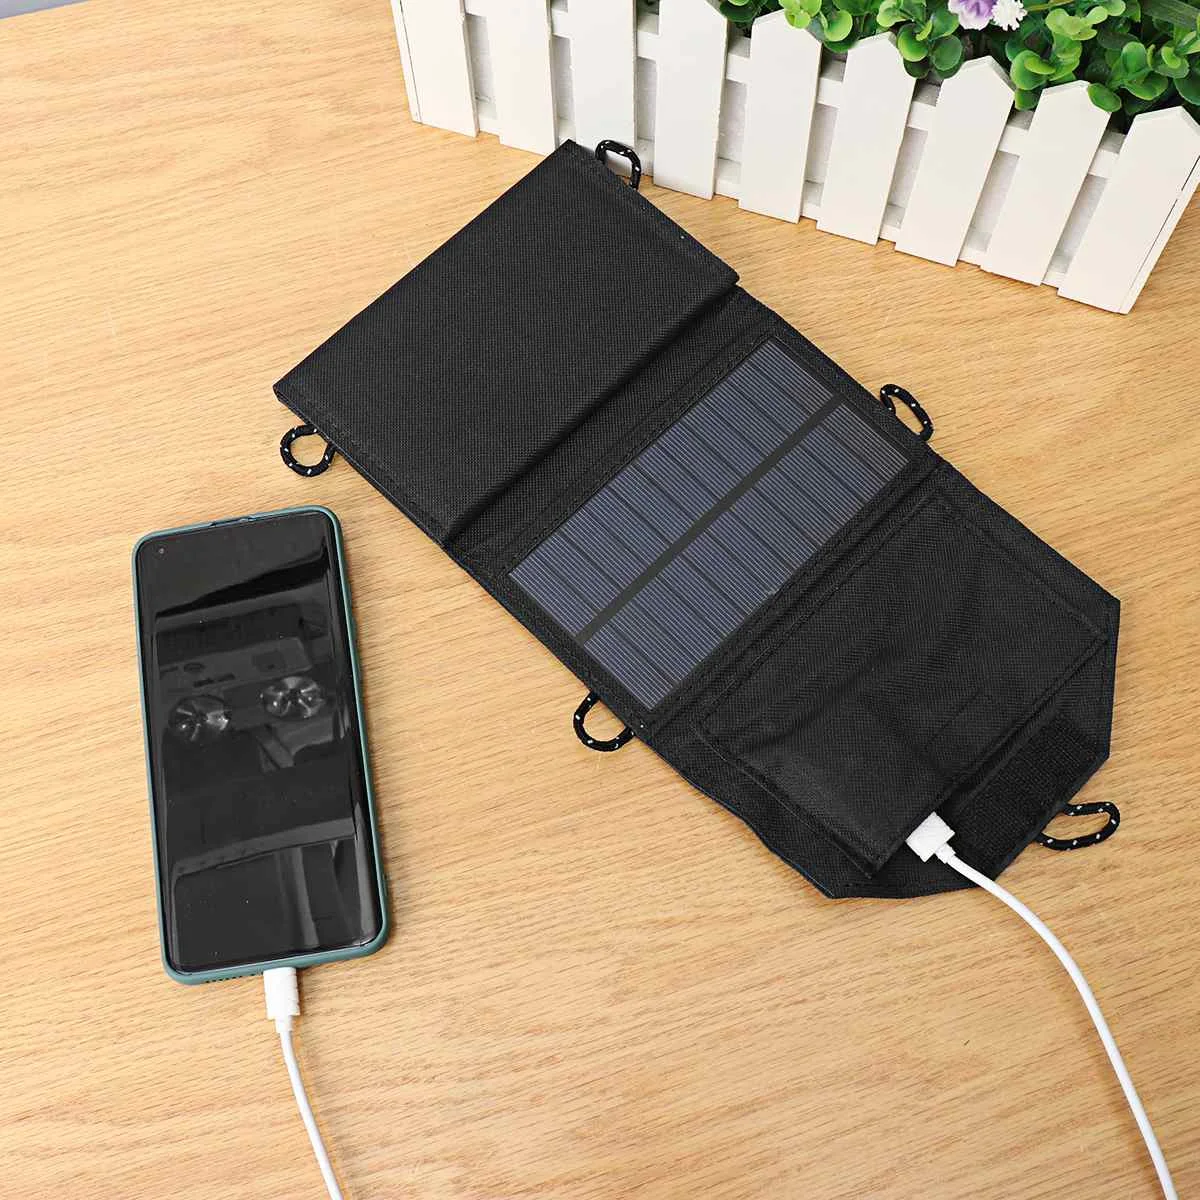 80w foldable solar panel solar kit complete cell power bank solar plate for hiking camping outdoor mobile power battery charger free global shipping